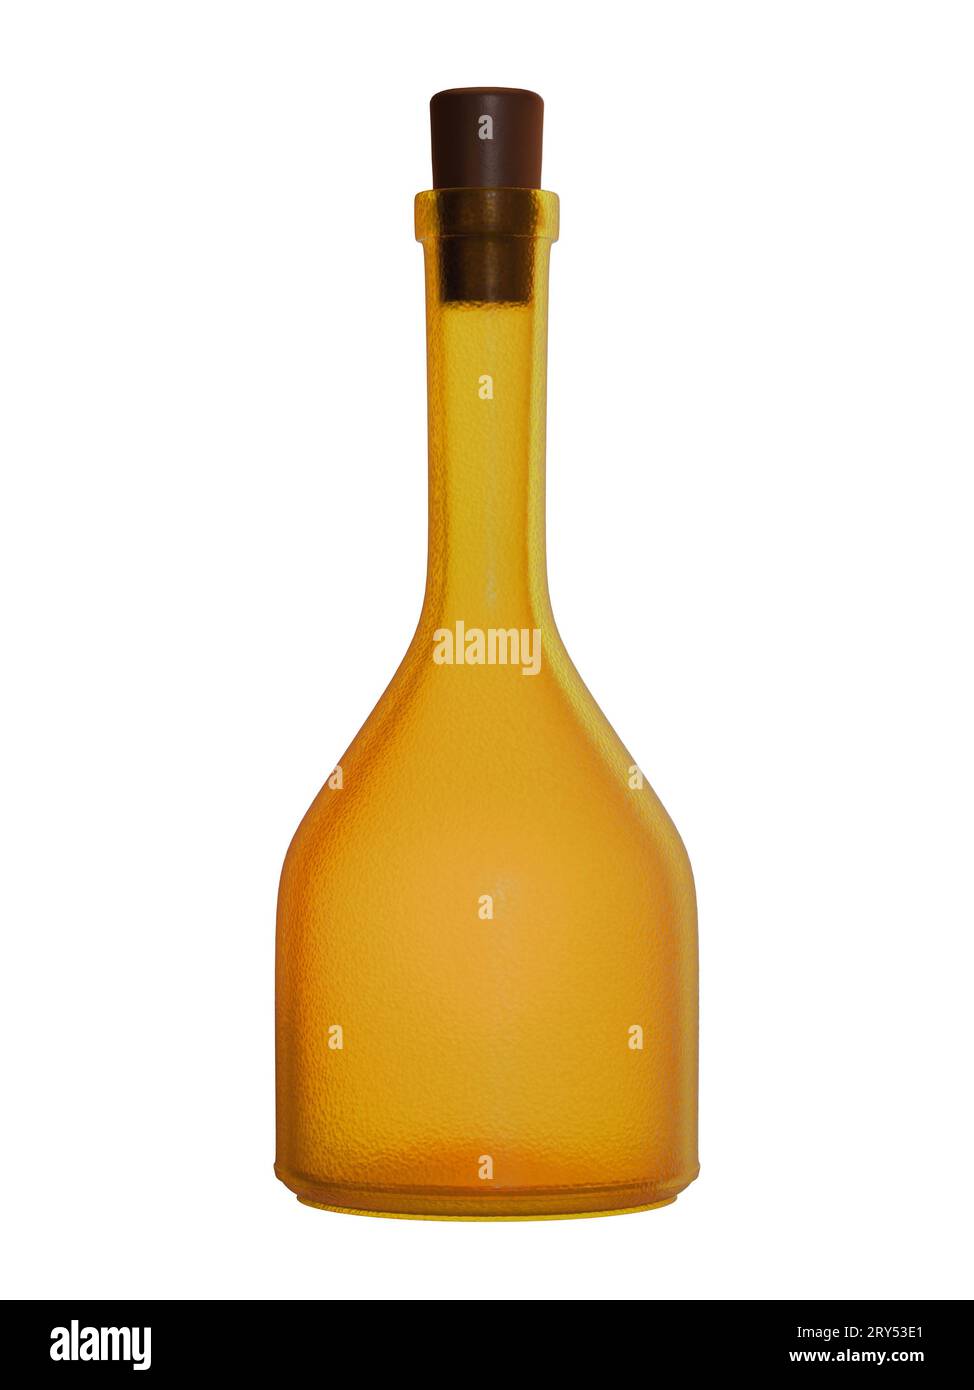 Clear glass and yellow bottle for liquor poison or potion with light and shadows 60s style white BG - Botella de cristal transparente y amarillo para Stock Photo